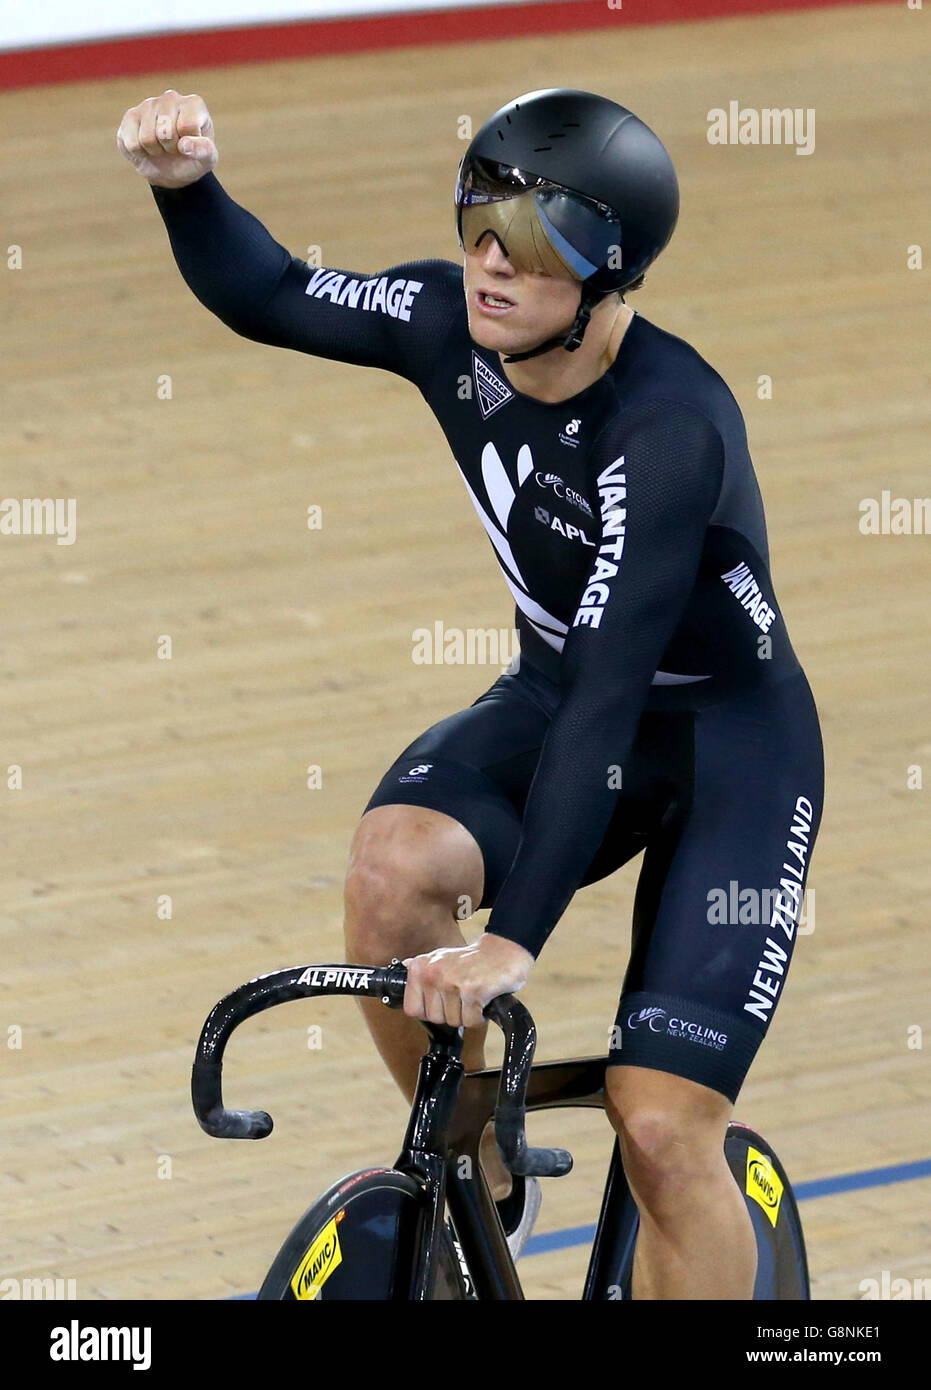 New Zealand's Ethan Mitchell celebrates after winning the Men's Team Spring final during day one of the UCI Track Cycling World Championships at Lee Valley VeloPark, London. Stock Photo